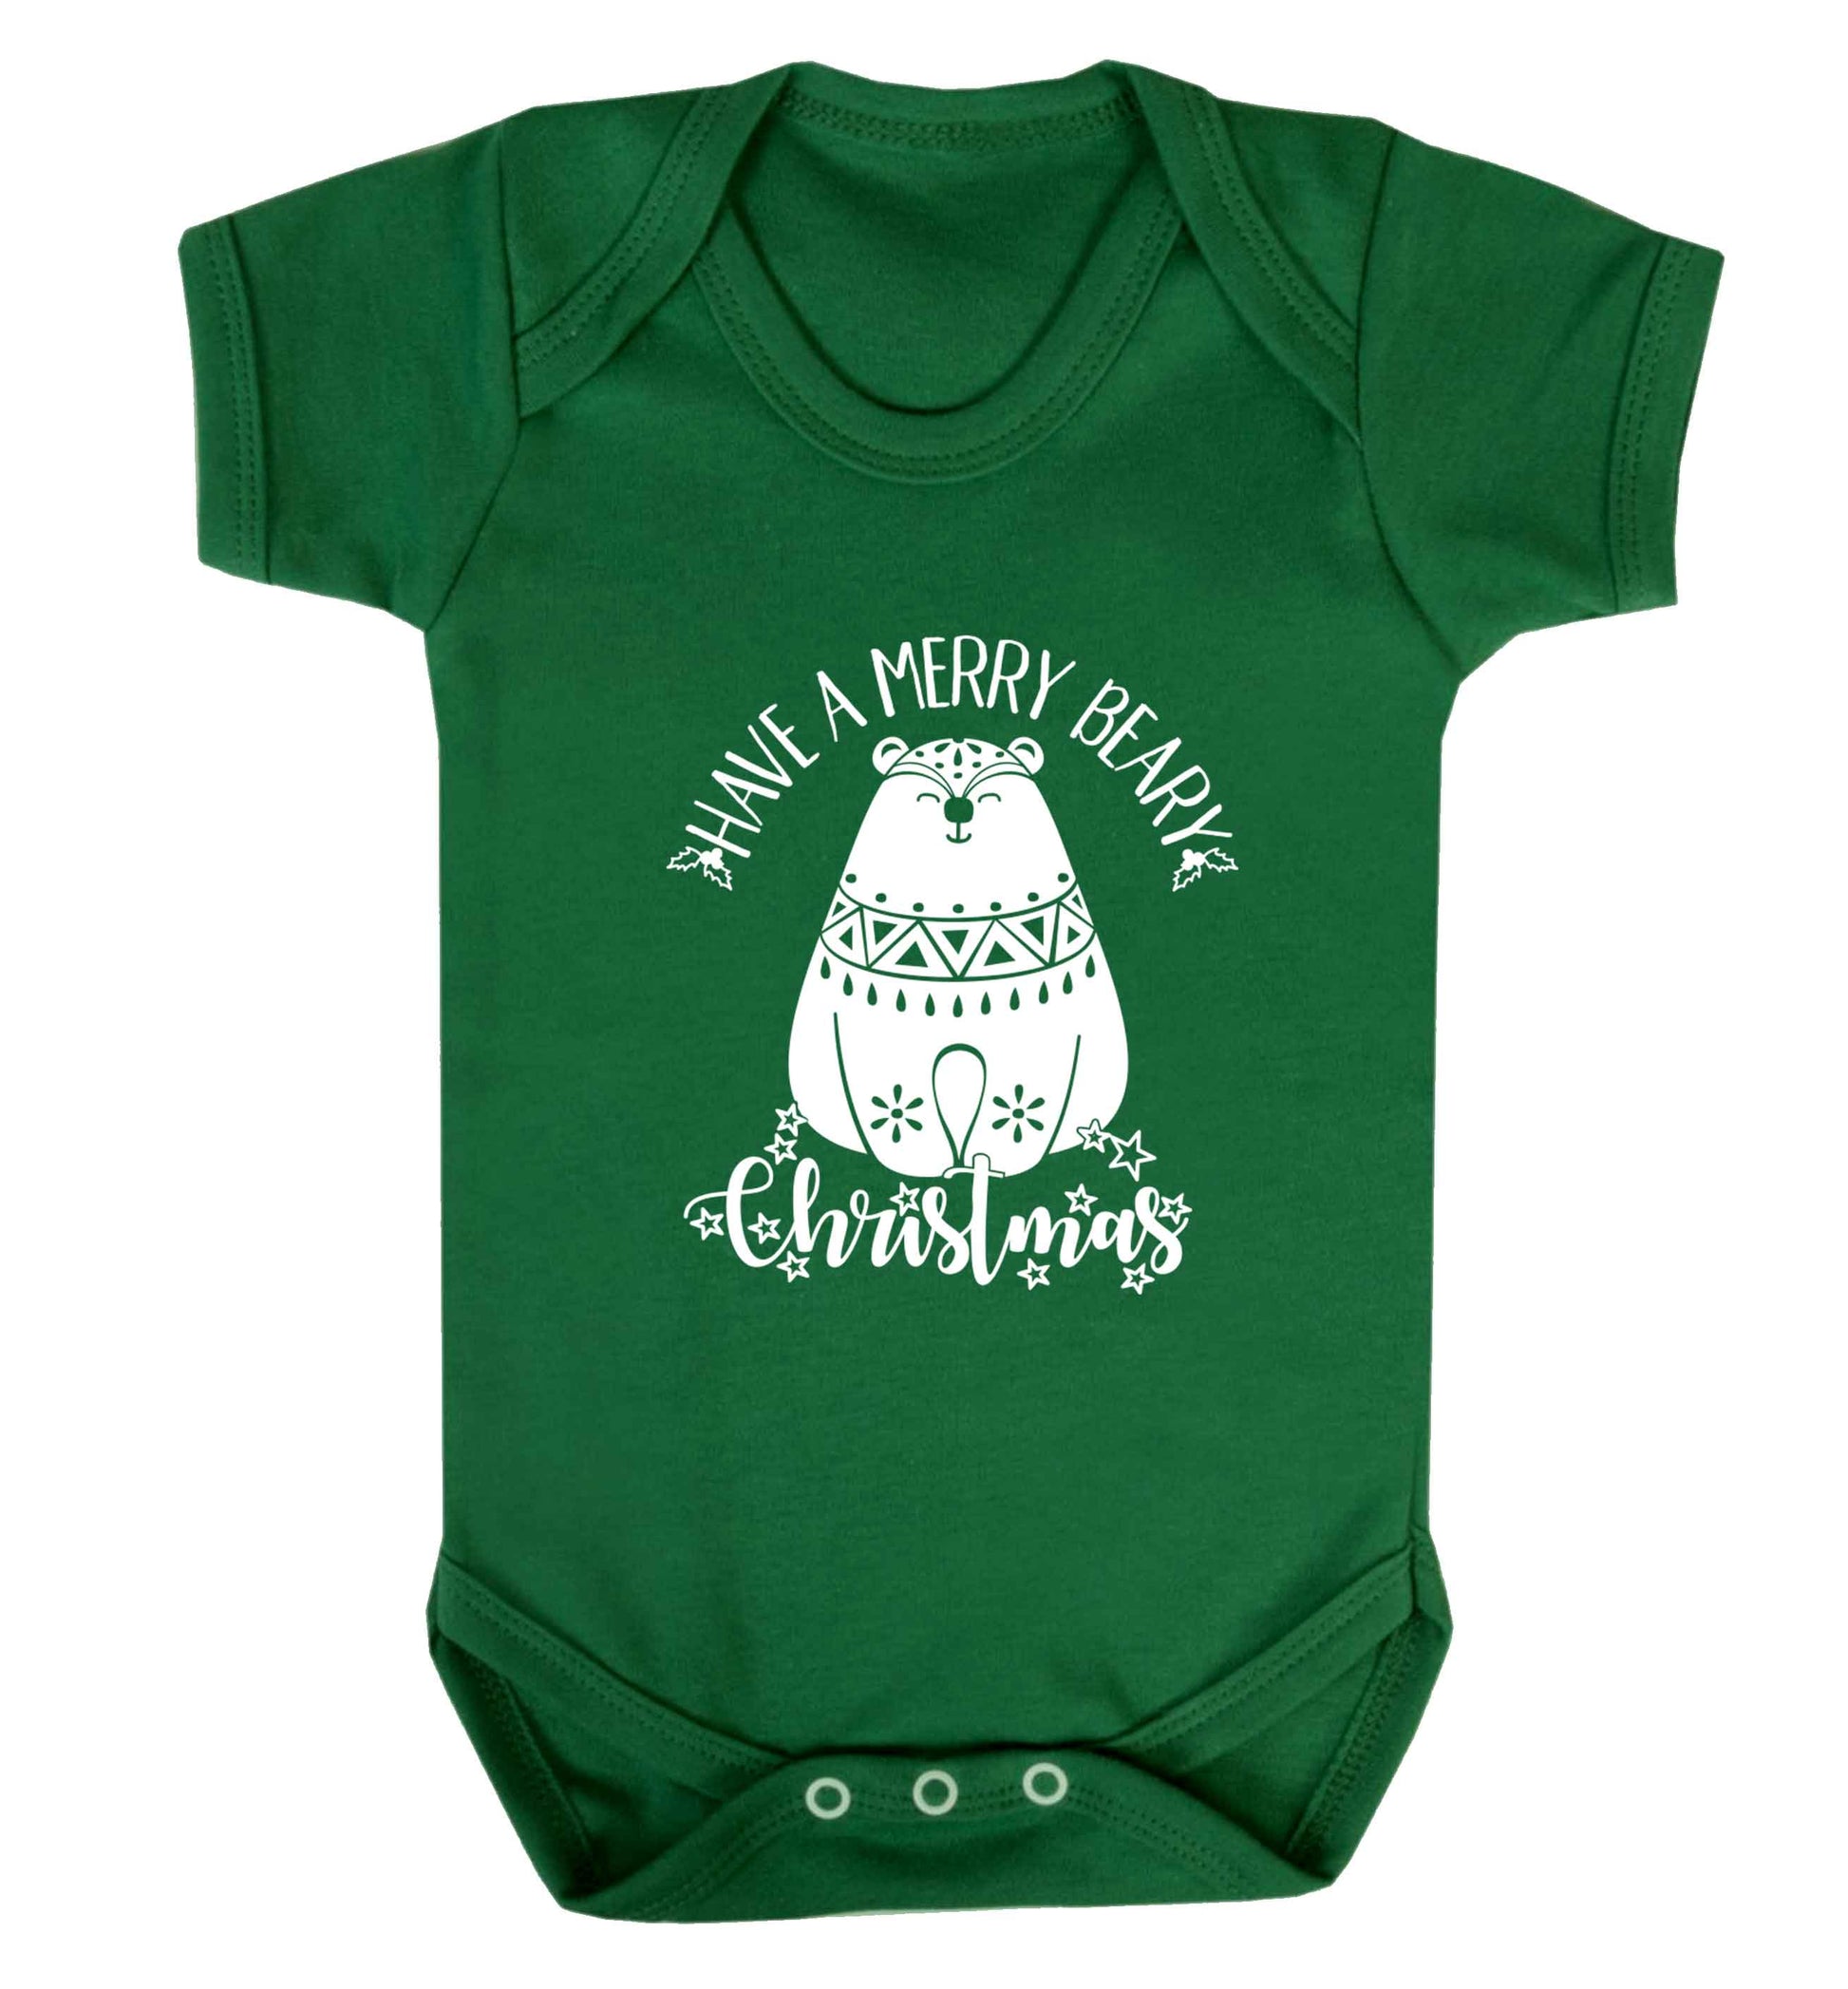 Have a merry beary Christmas Baby Vest green 18-24 months